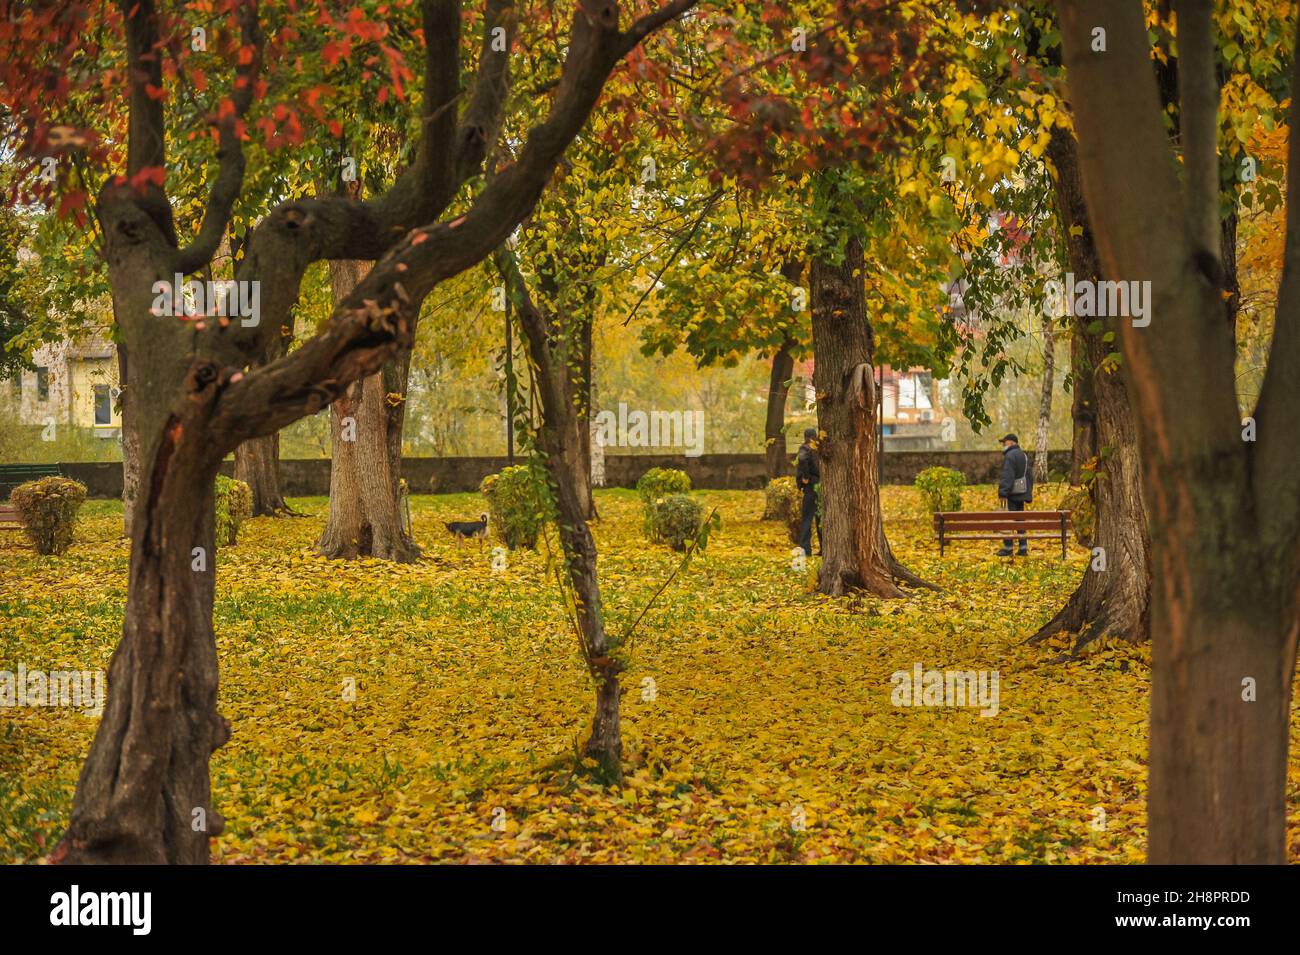 Autumn morning scenery with trees in a park with leaves carpet Stock Photo